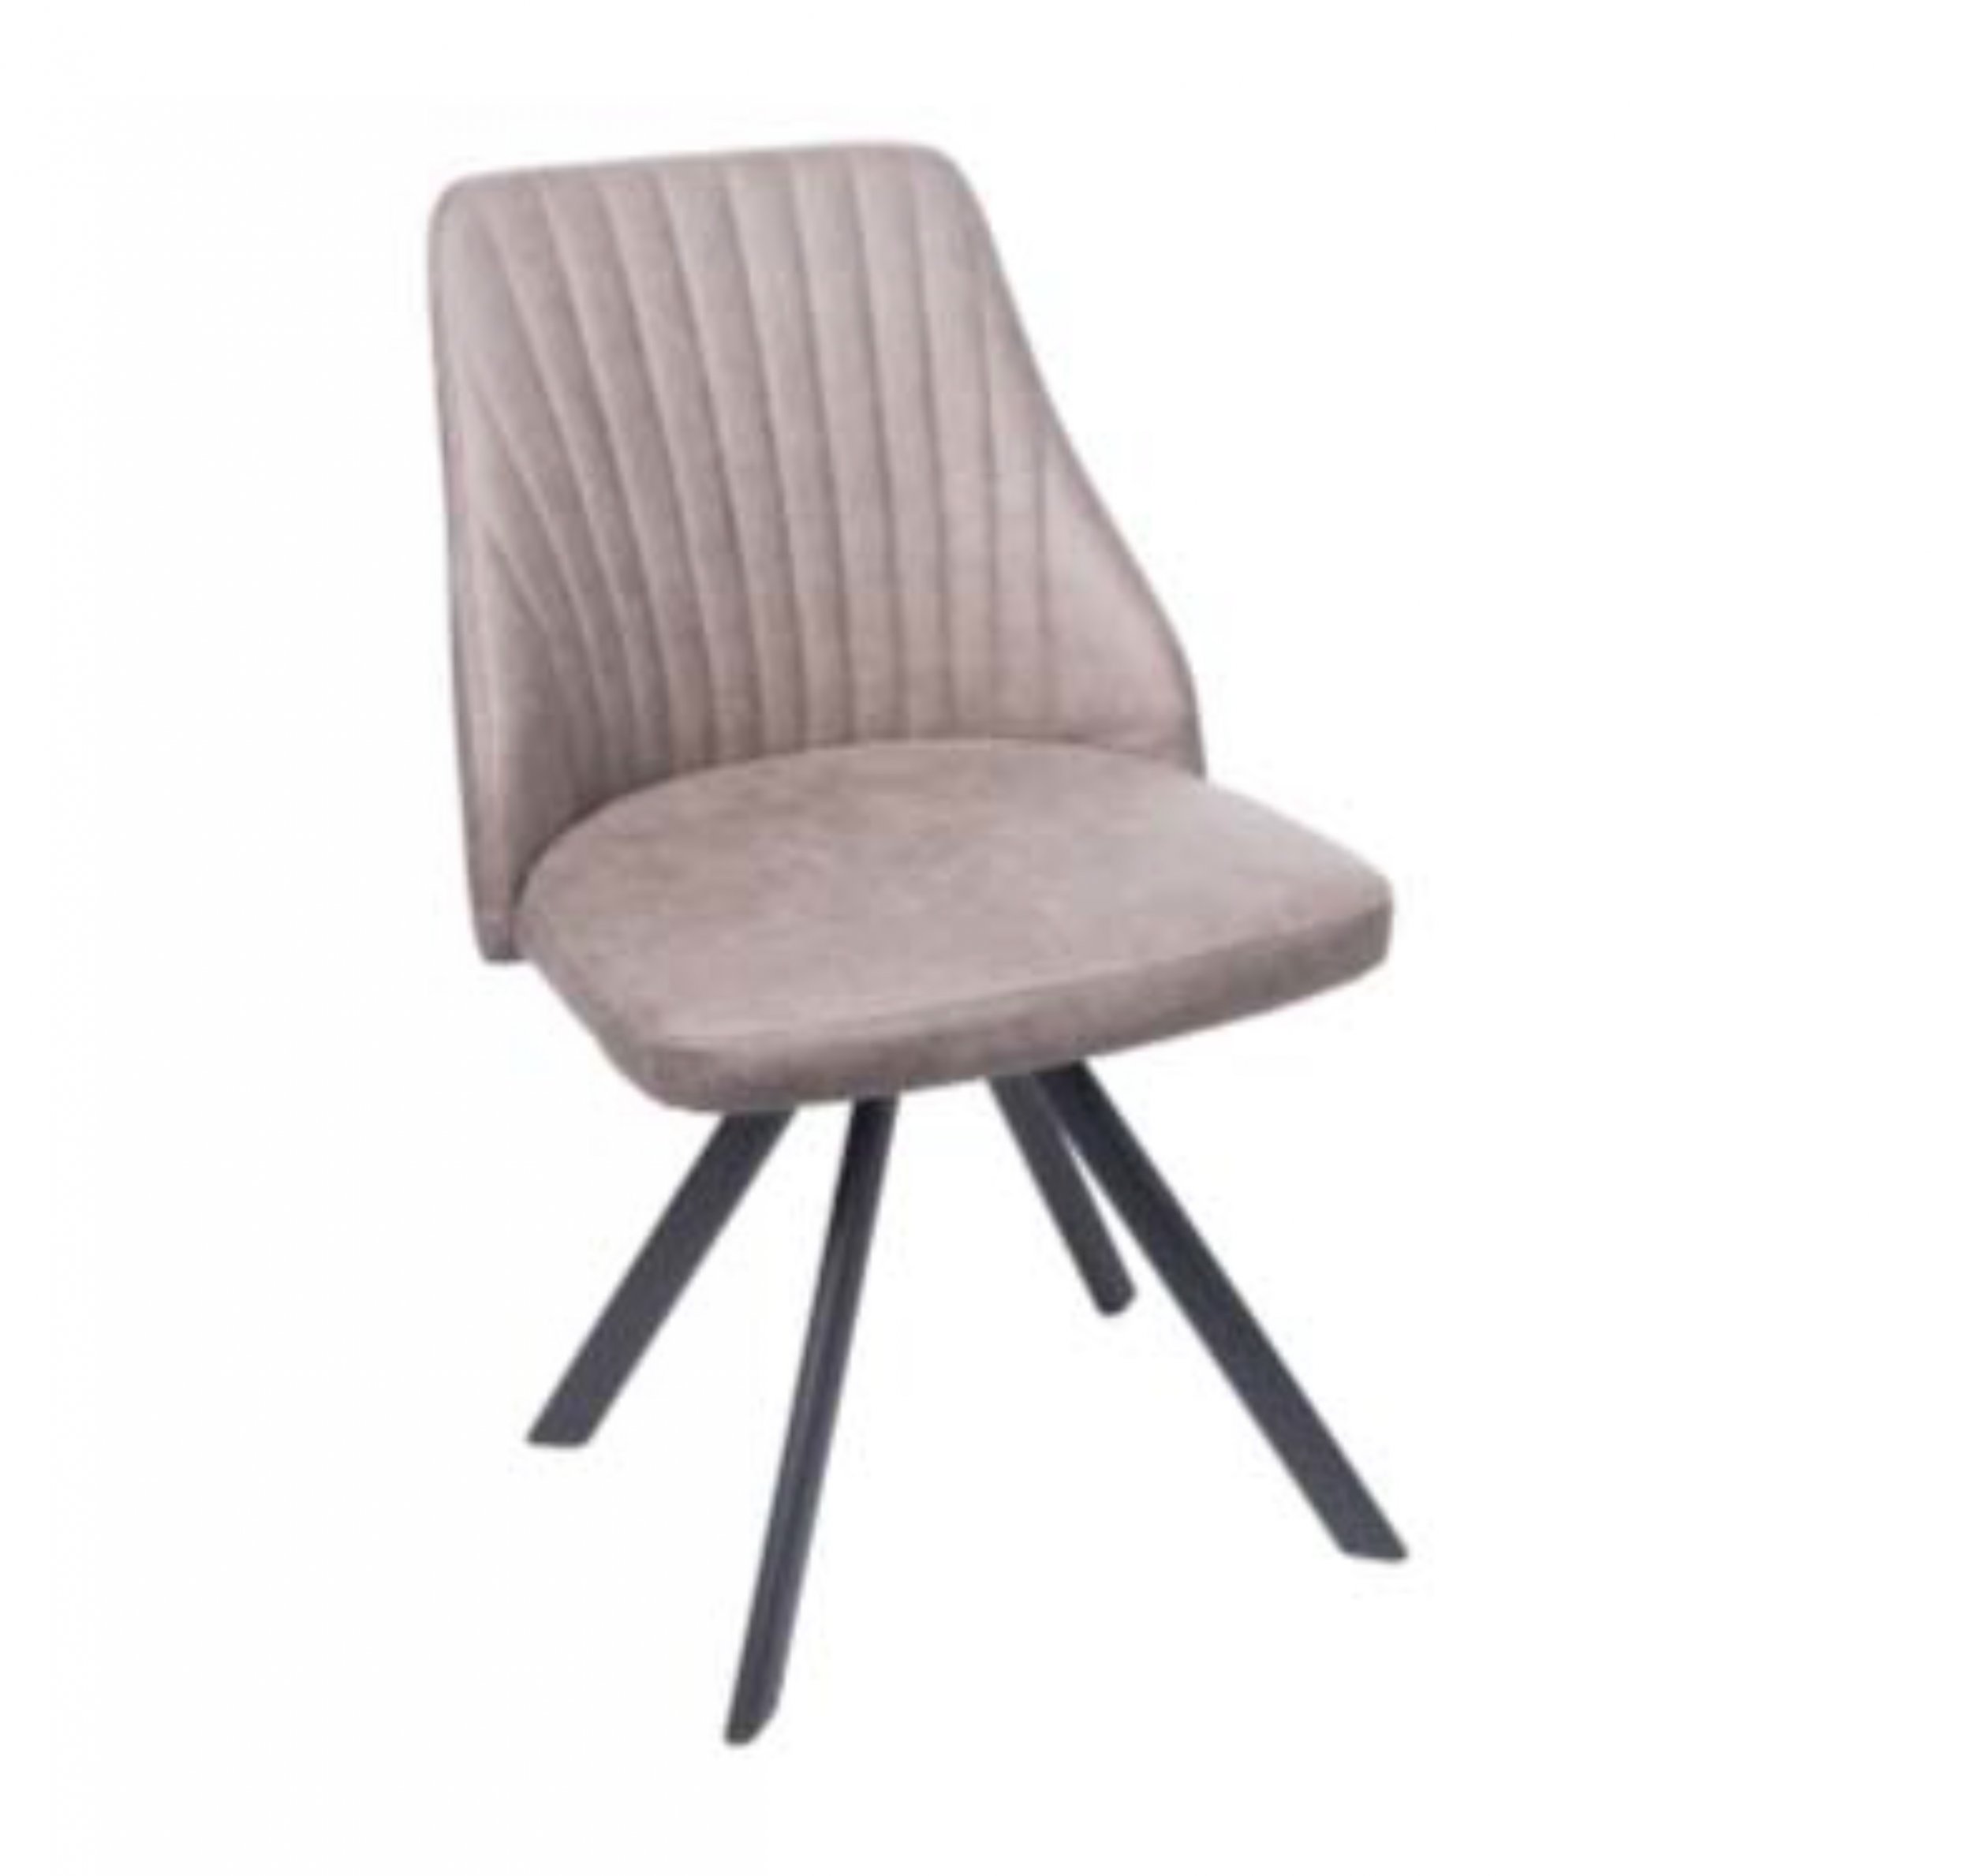 Austin Dining Chair | Eyres Furniture